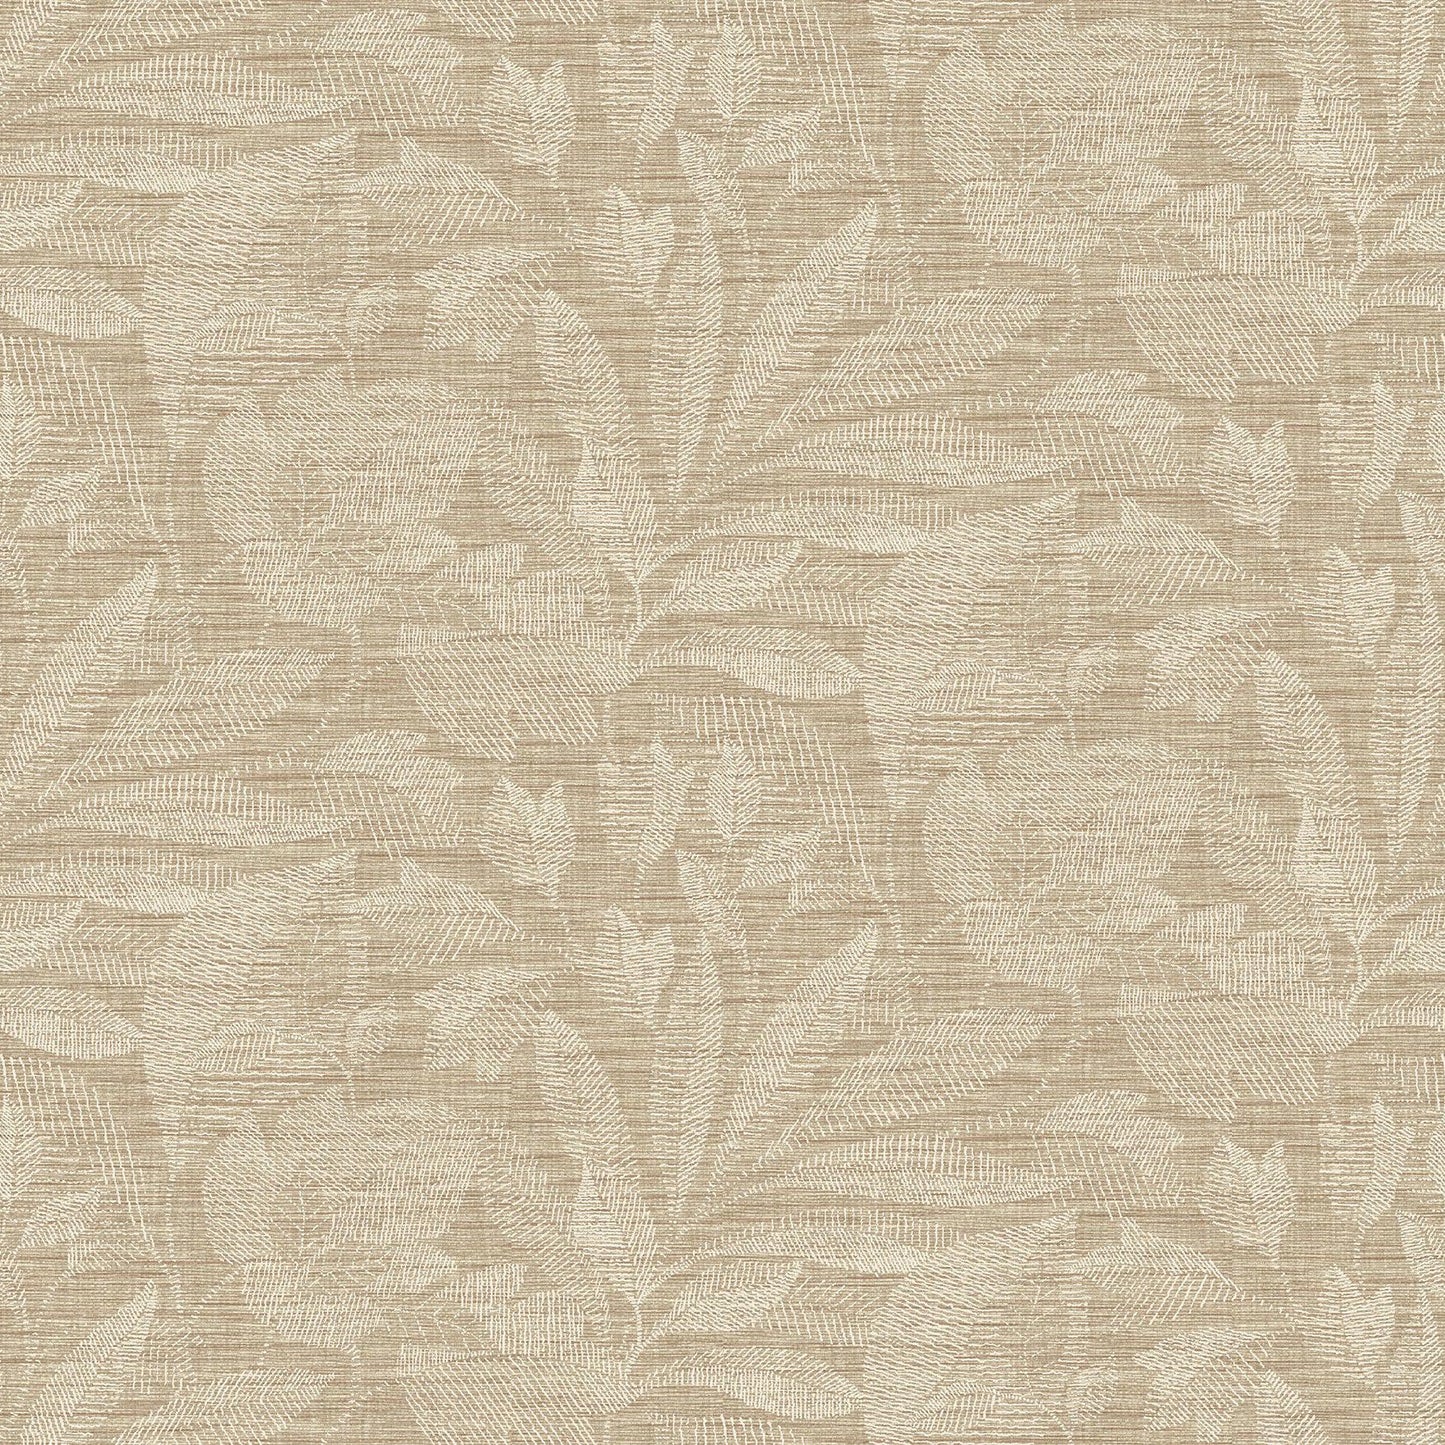 Order 2971-86155 Dimensions Lei Wheat Etched Leaves Wheat A-Street Prints Wallpaper